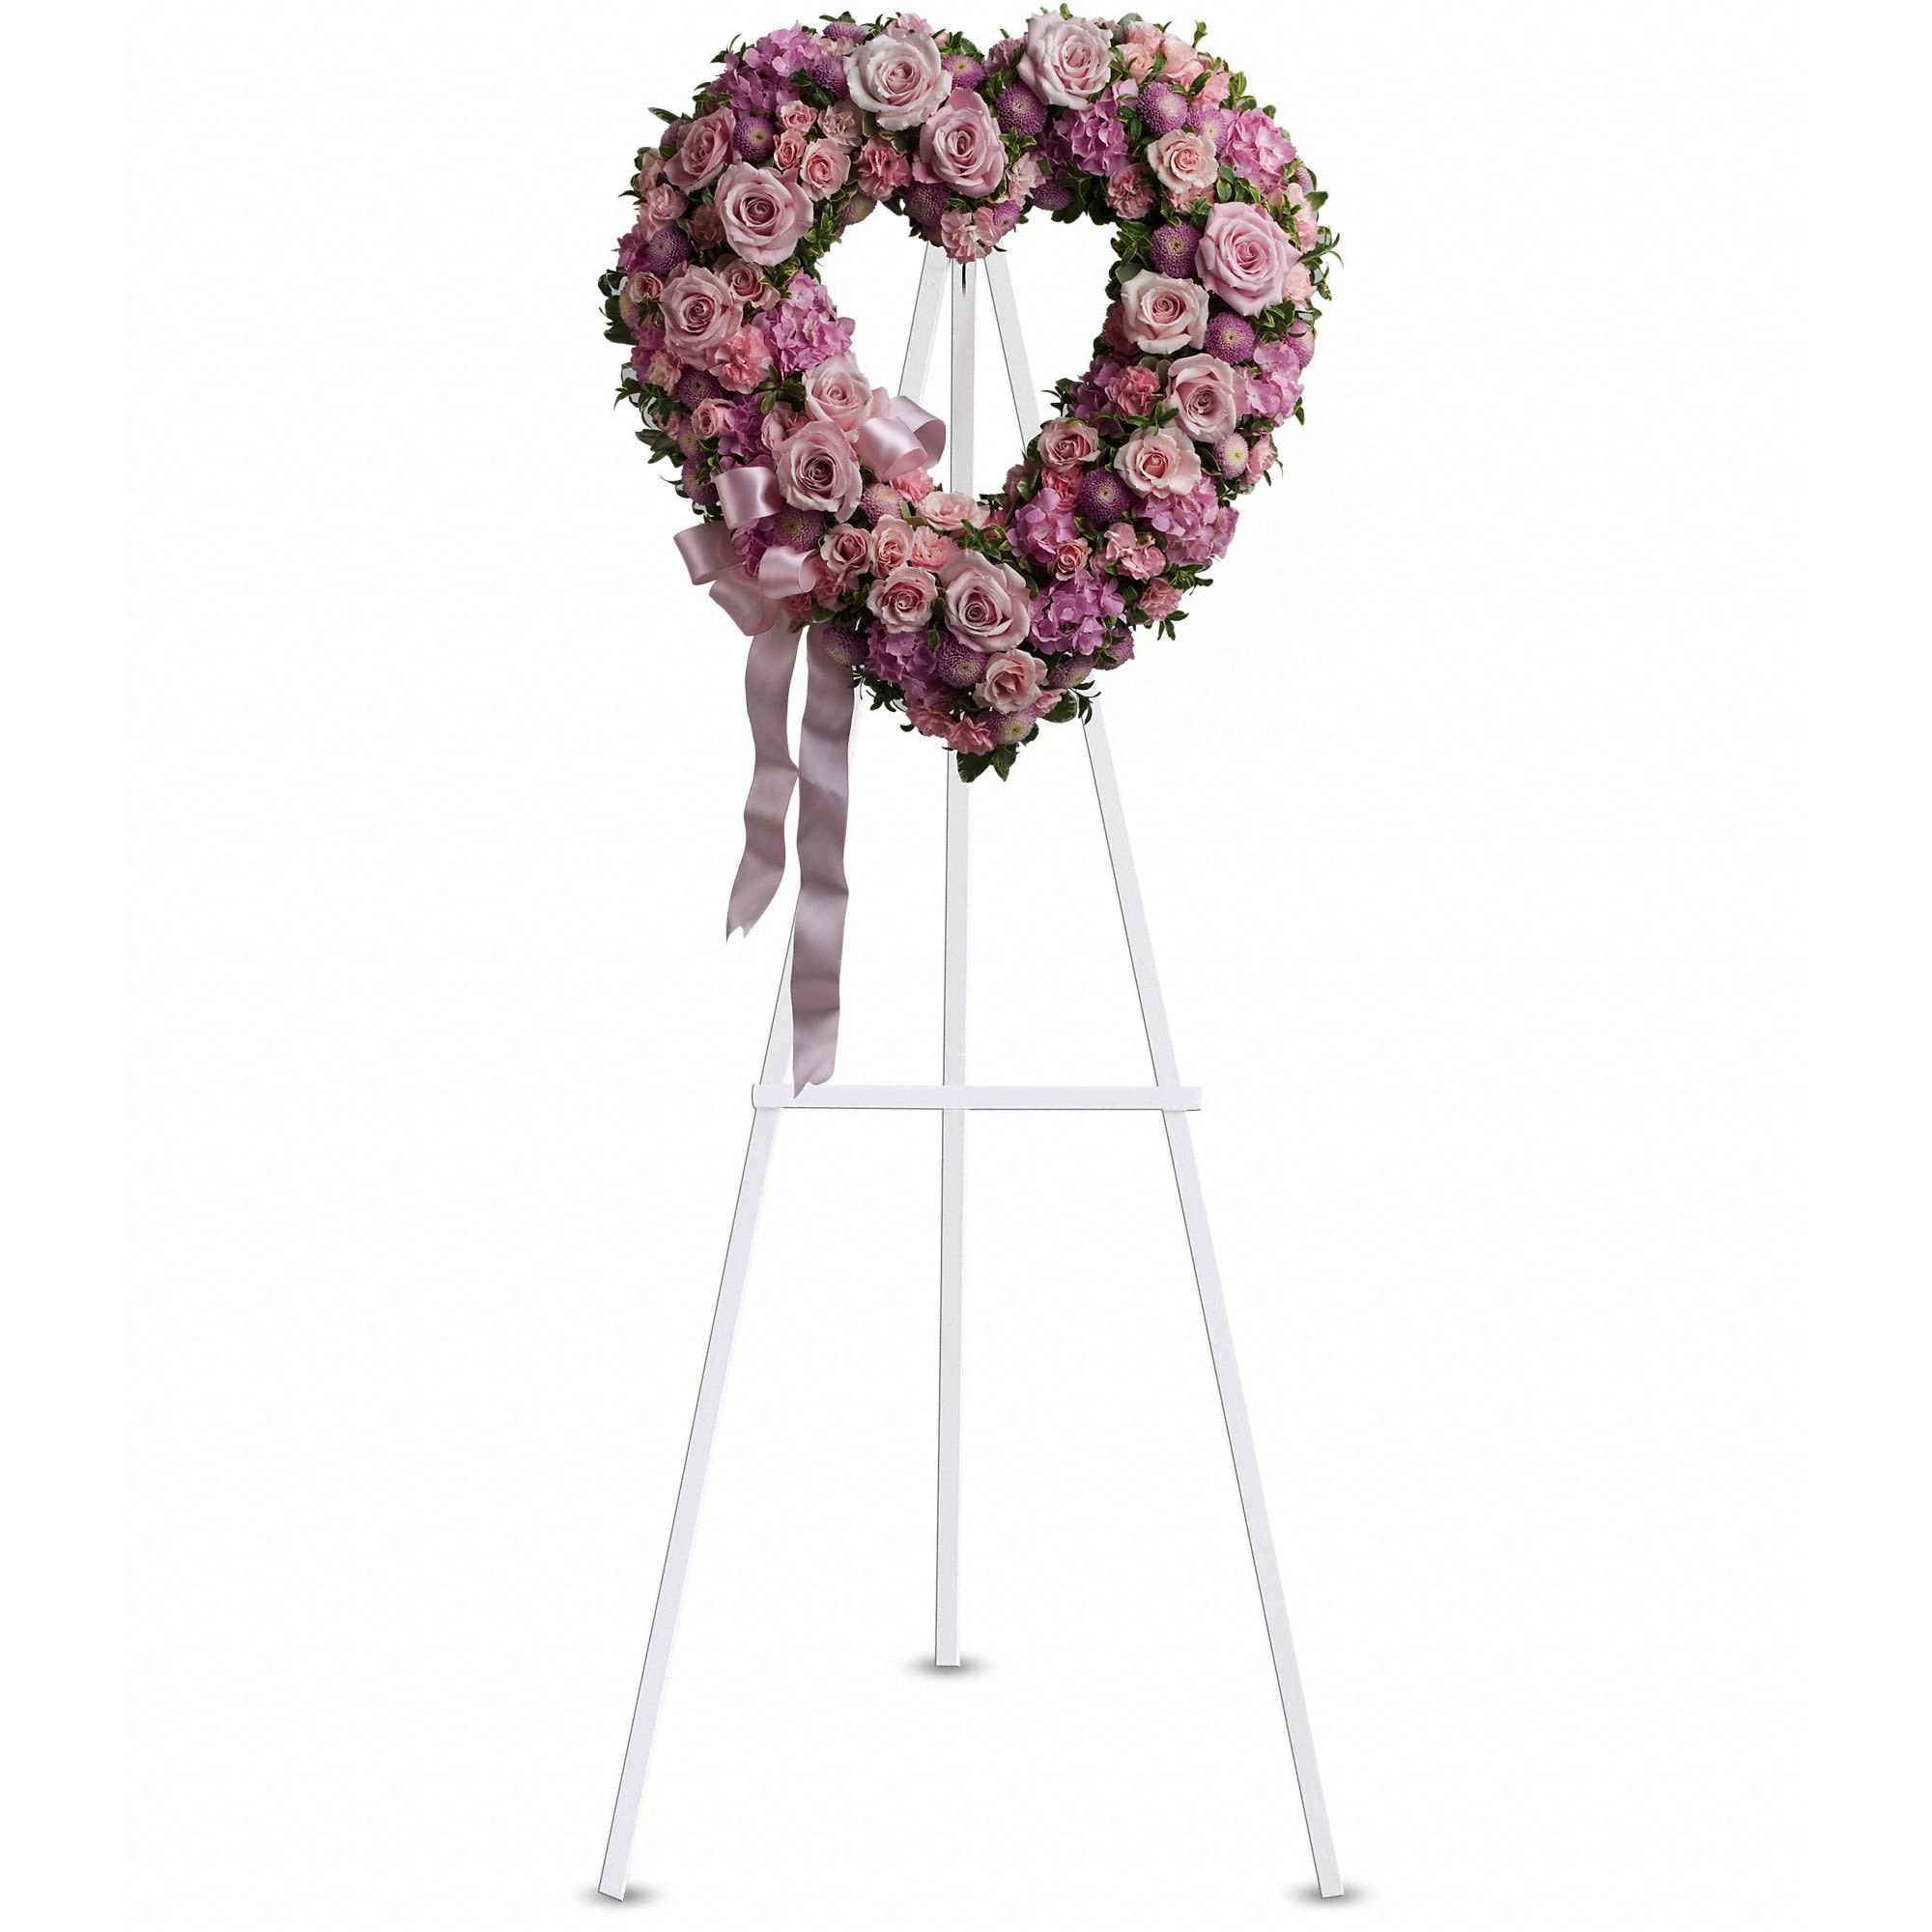 Rose Garden Heart by Teleflora - A tender and classic tribute to a precious life. Heartfelt emotions and sympathies find delicate expression here. 